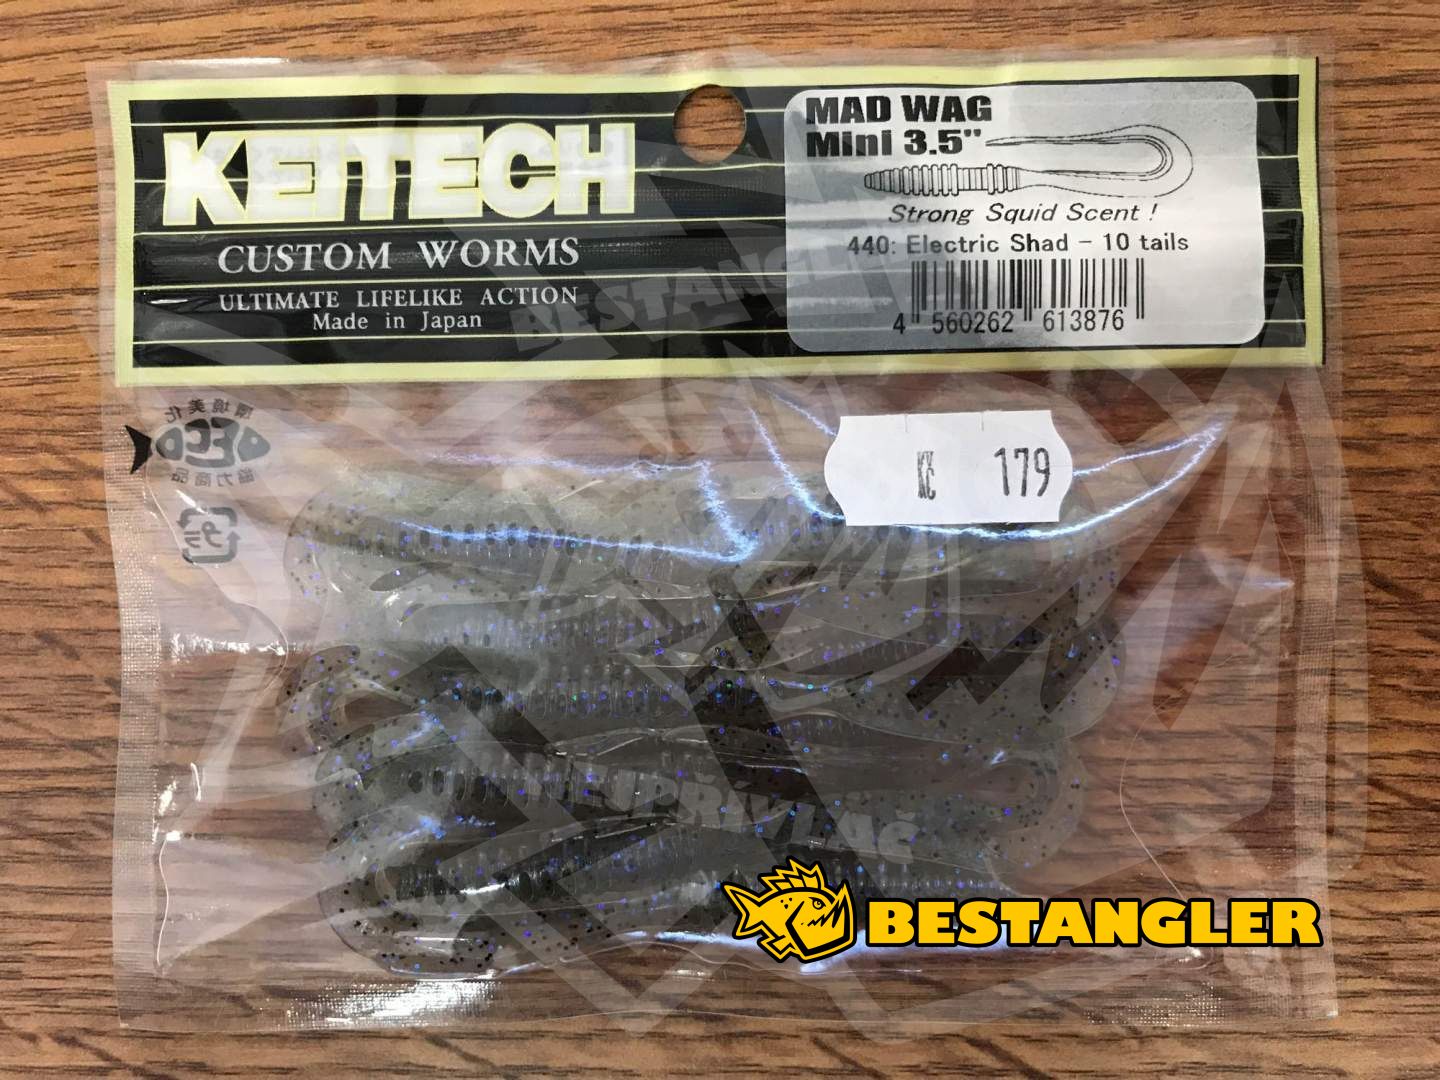 Keitech Mad Wag 3.5 Electric Shad